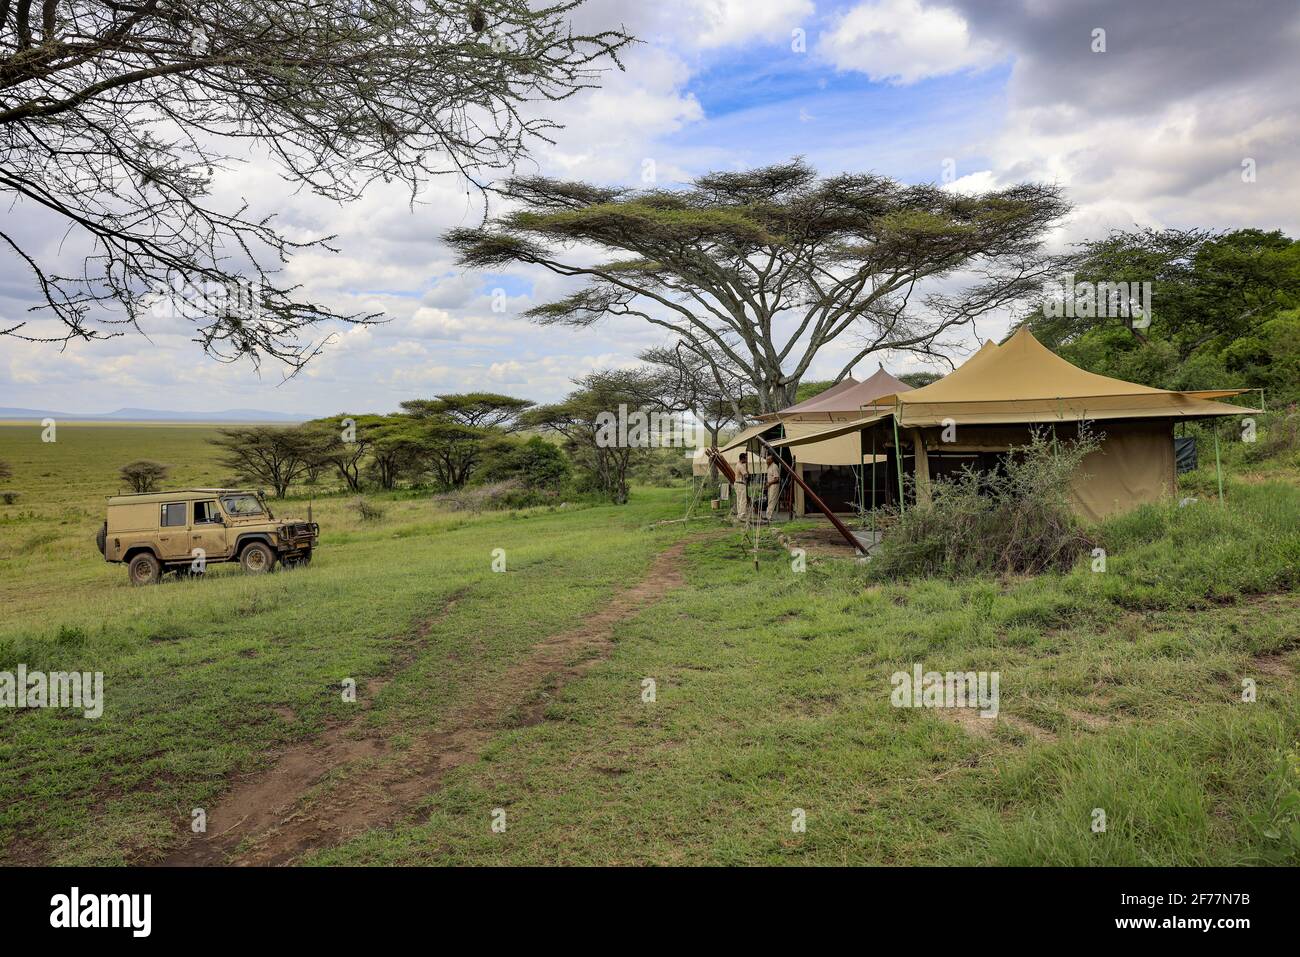 Tanzania, Arusha region, Serengeti National Park, Unesco World Heritage, The Matembsi Classic Camp, is set up on the passage of the migrations of wild animals, It welcomes tourists to discover the fauna in the park from the Serengeti Stock Photo